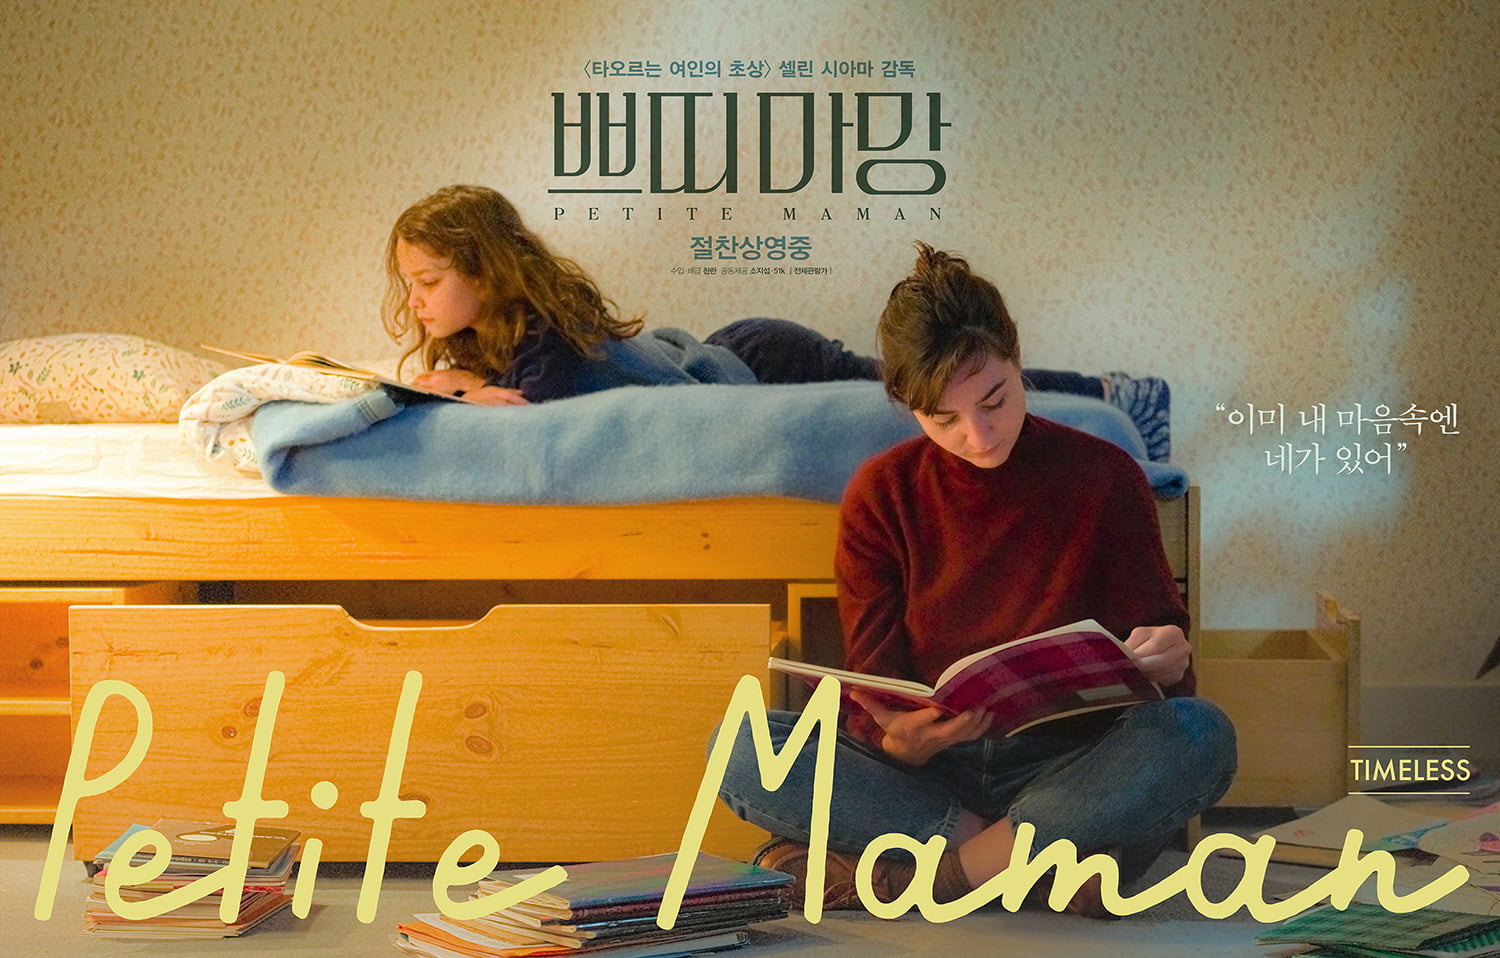 Petite maman Movie 2022, Official Trailer, Release Date, HD Poster